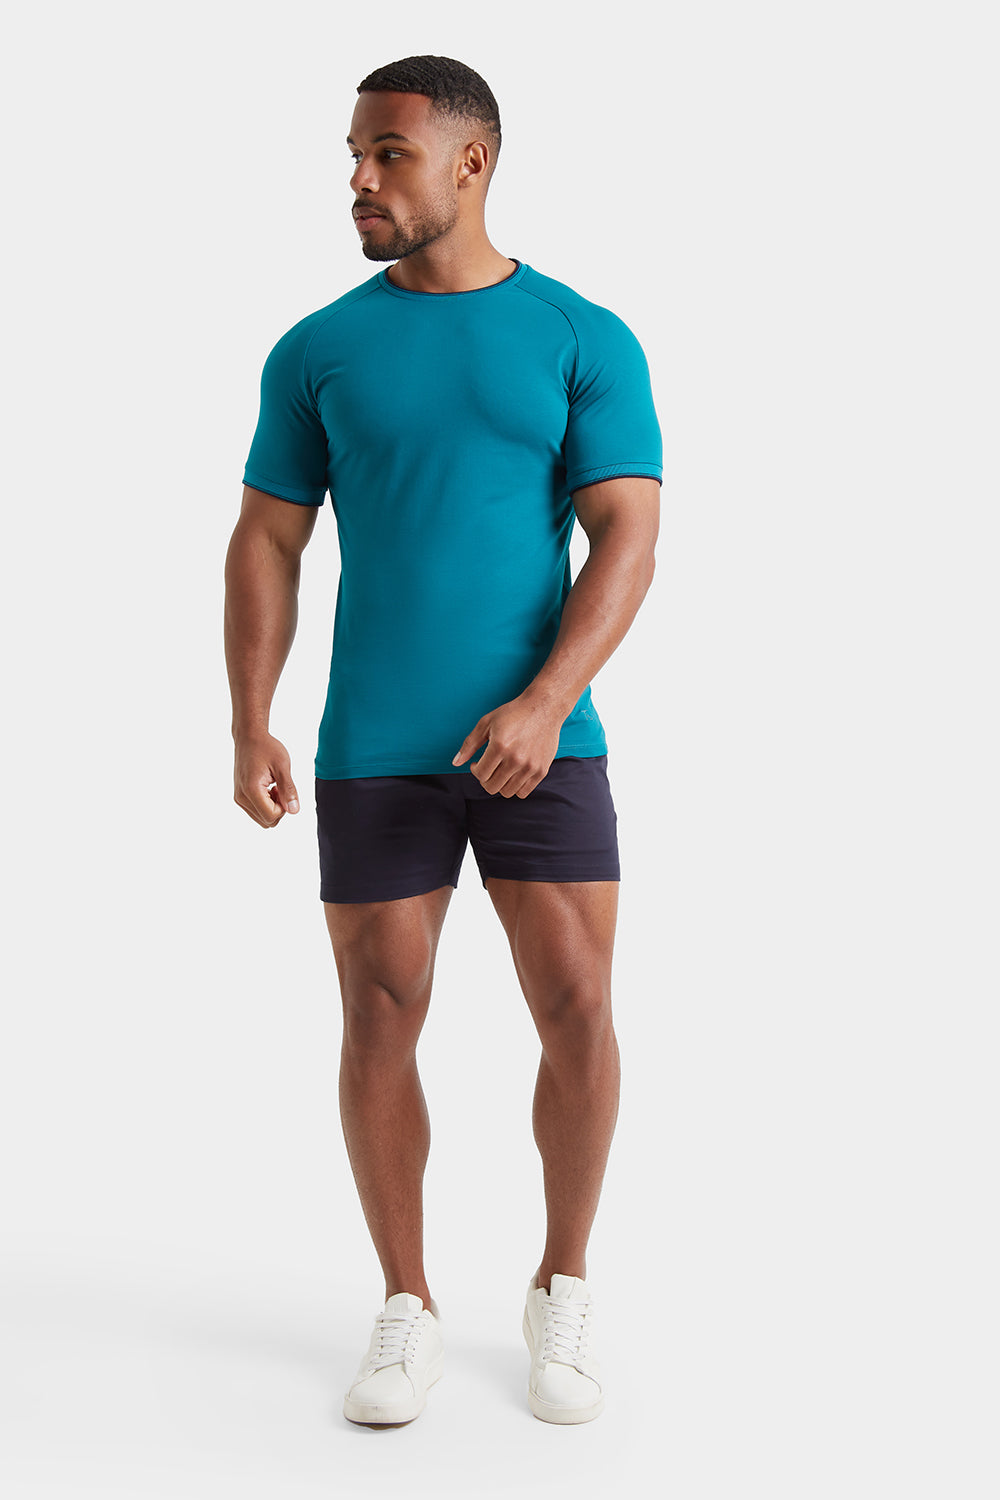 Tipped T-shirt in Peacock - TAILORED ATHLETE - ROW